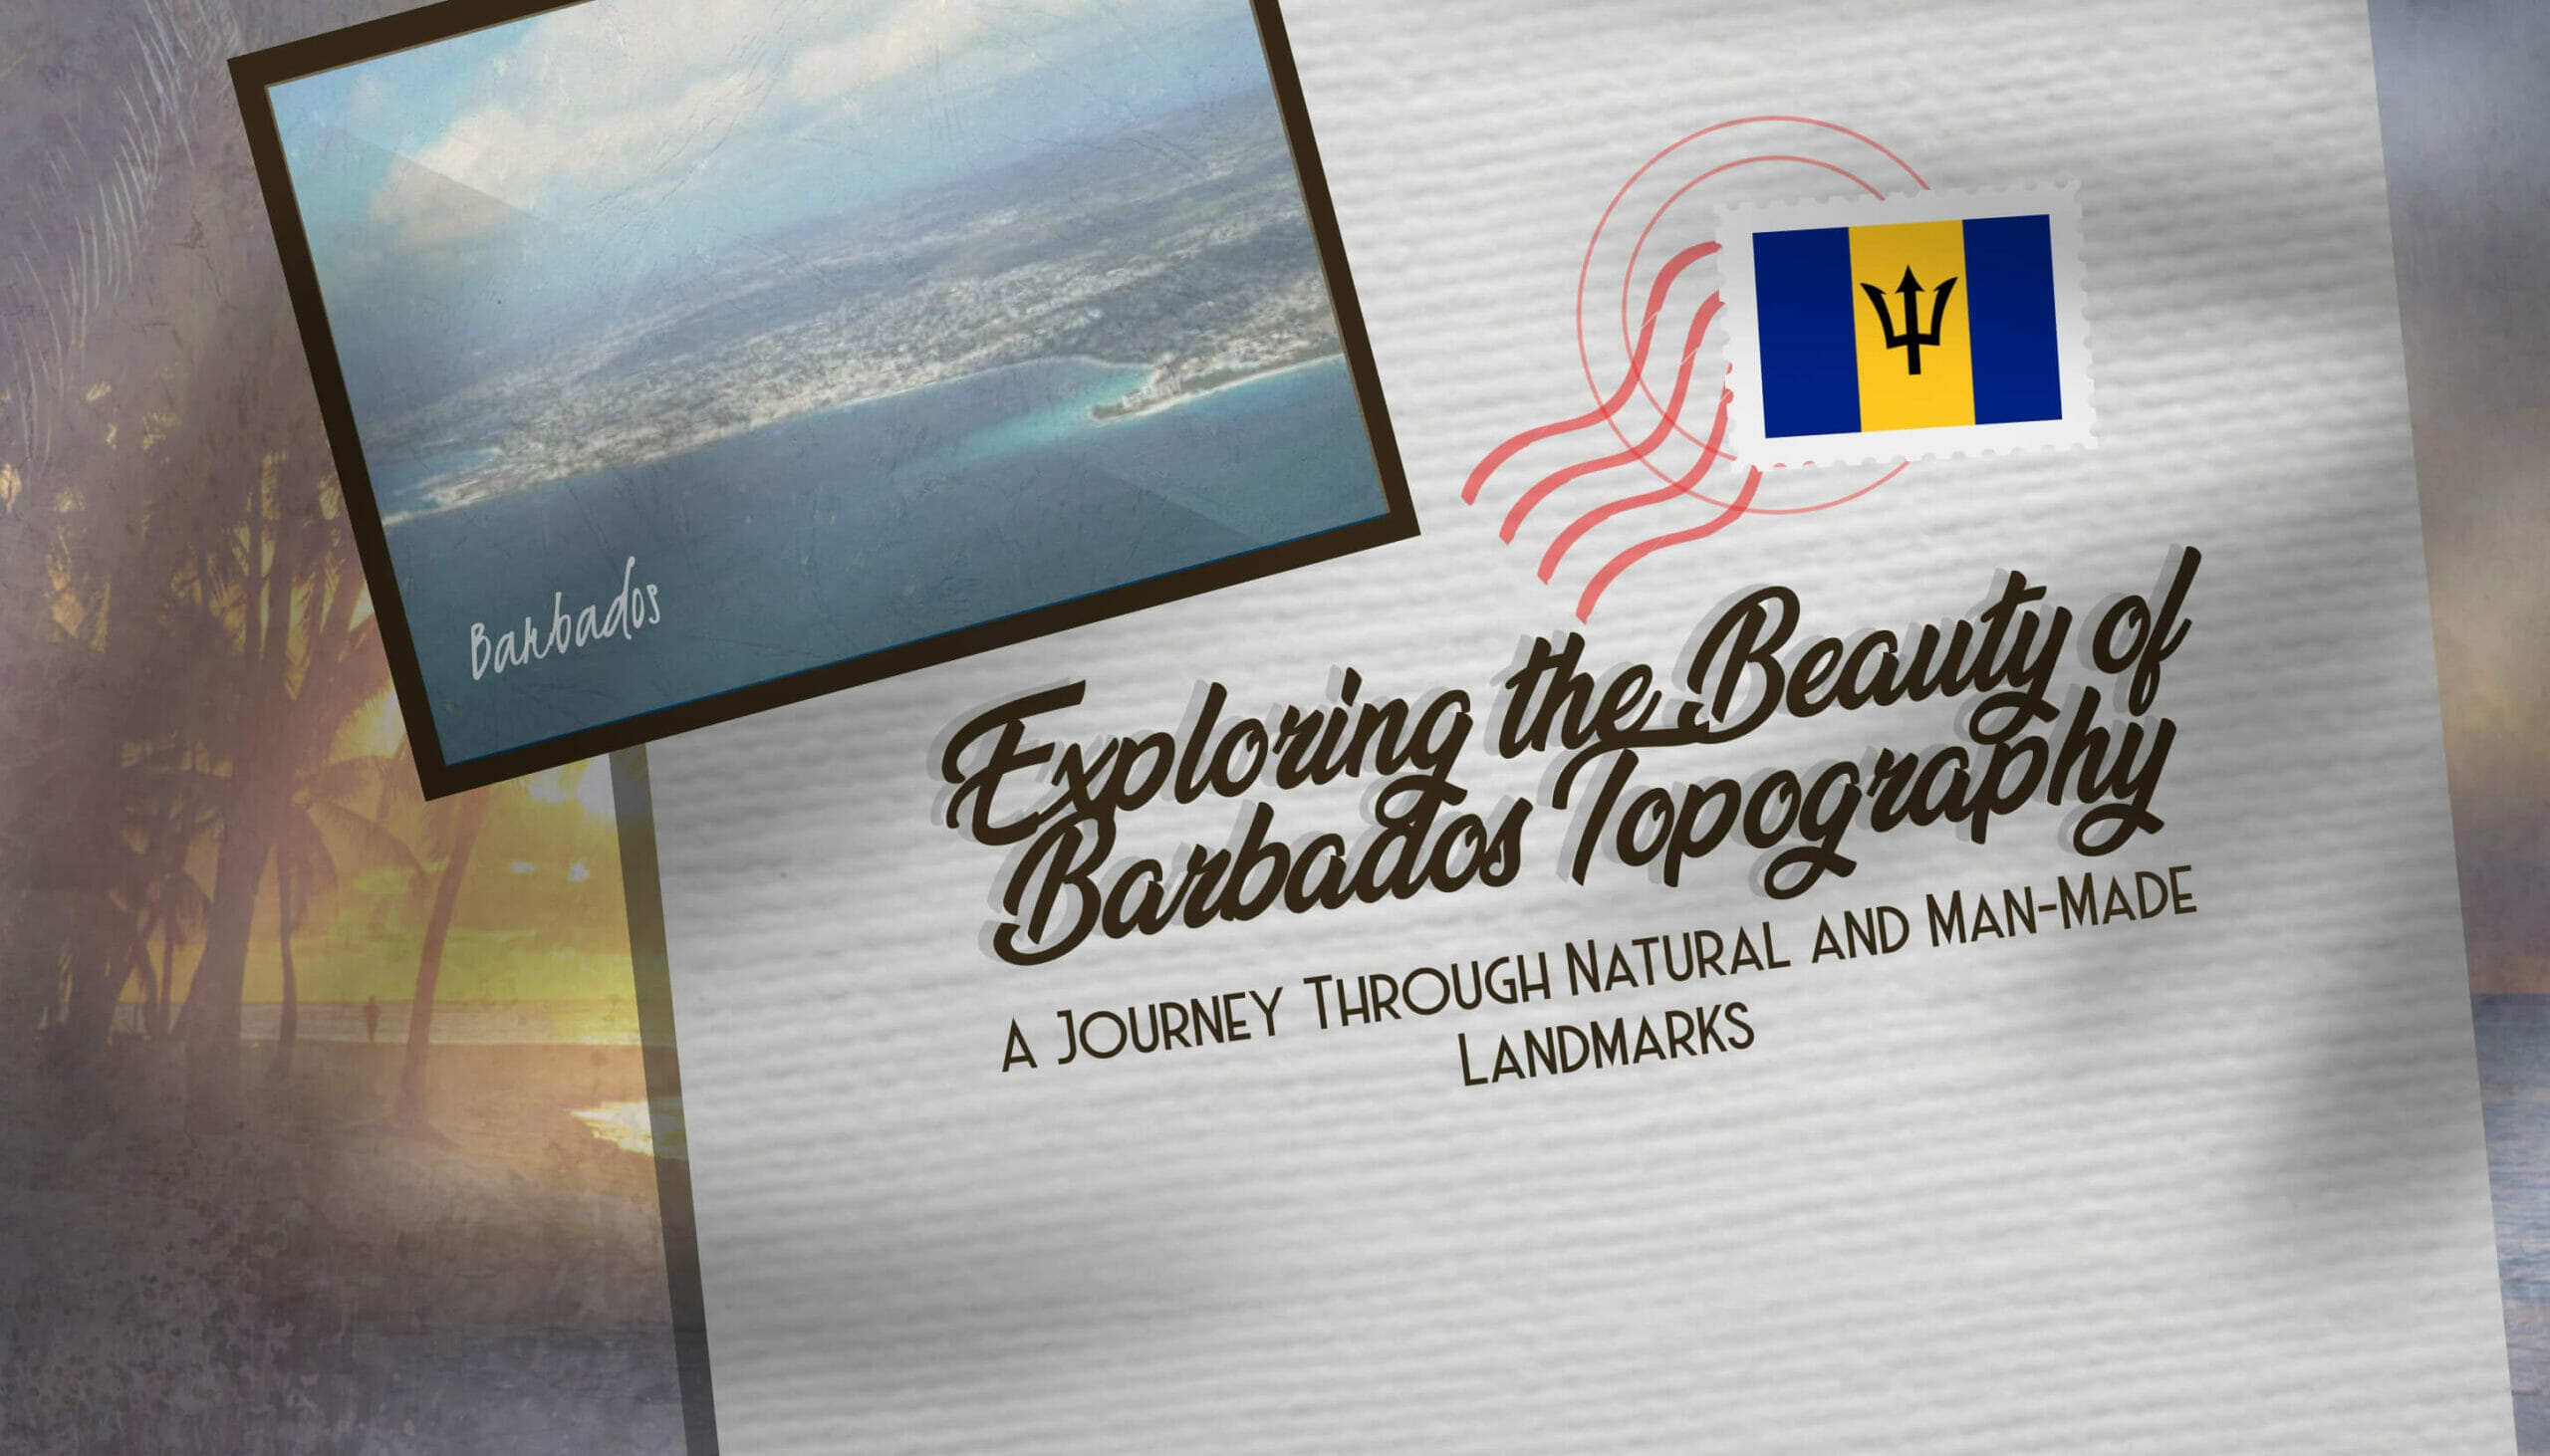 Exploring the Beauty of Barbados Topography